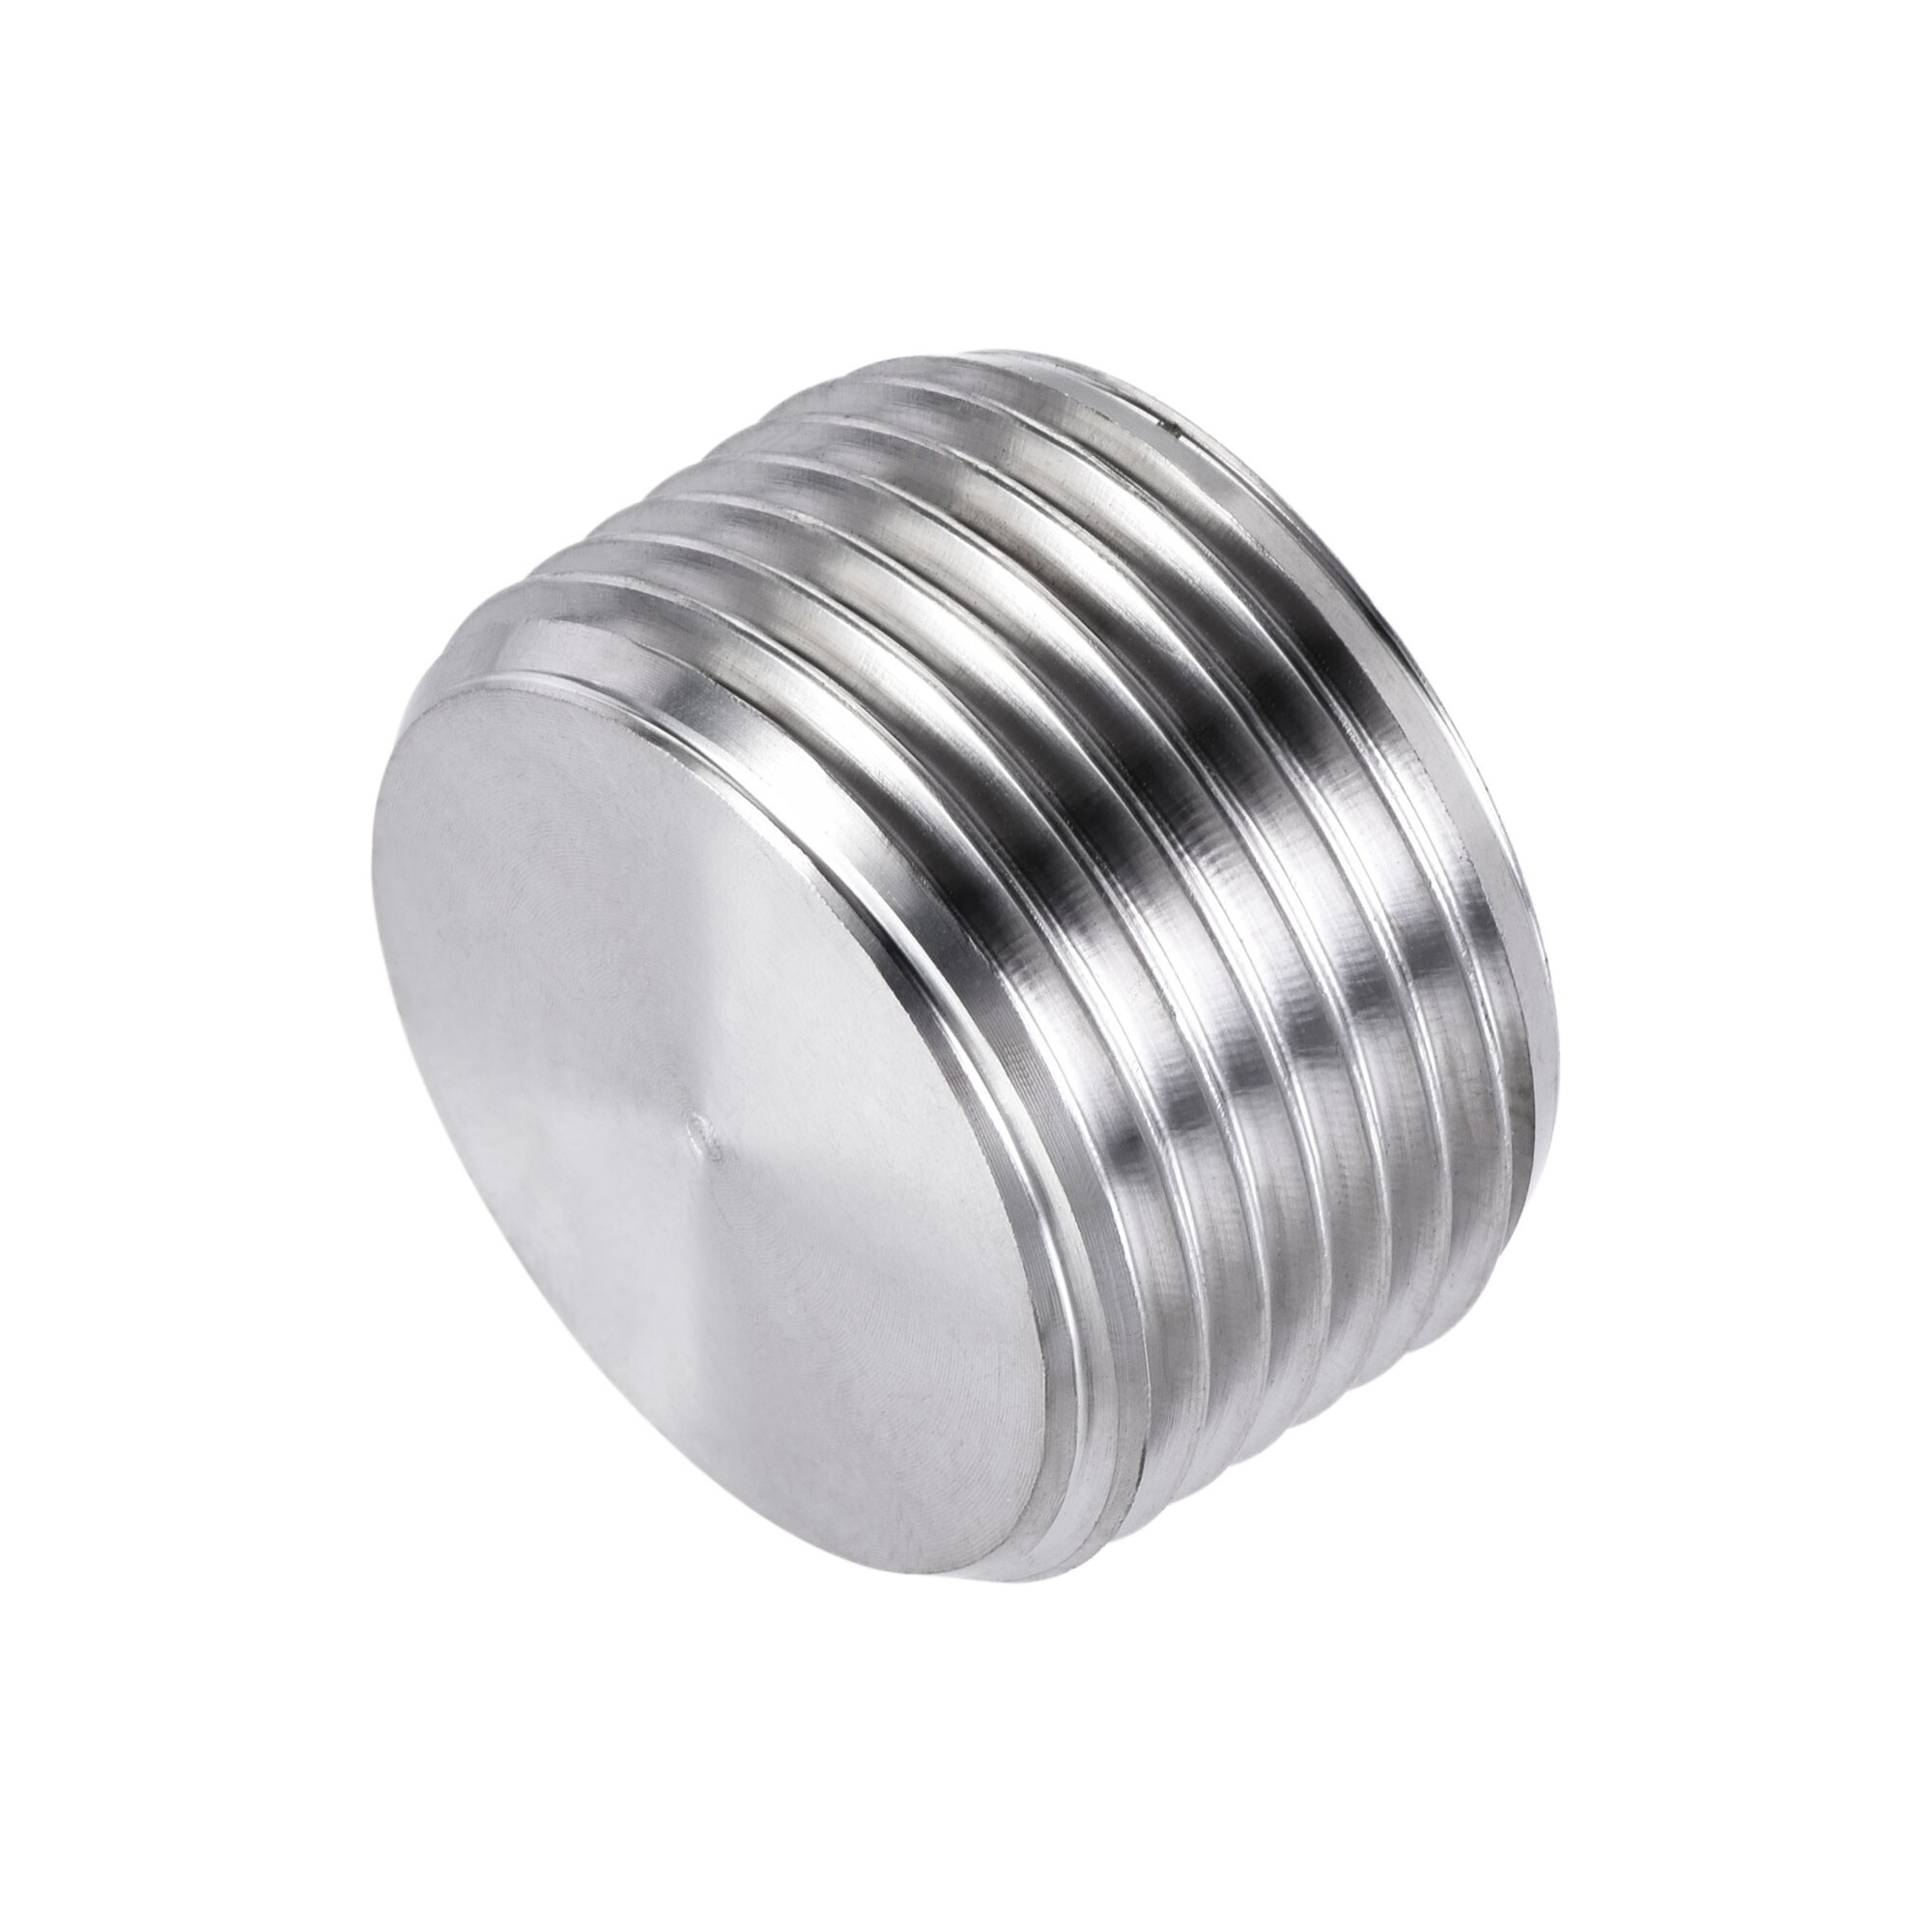 M20x1.5mm Male SS304 Countersunk End Plug With Flange Internal Hex Head Socket 